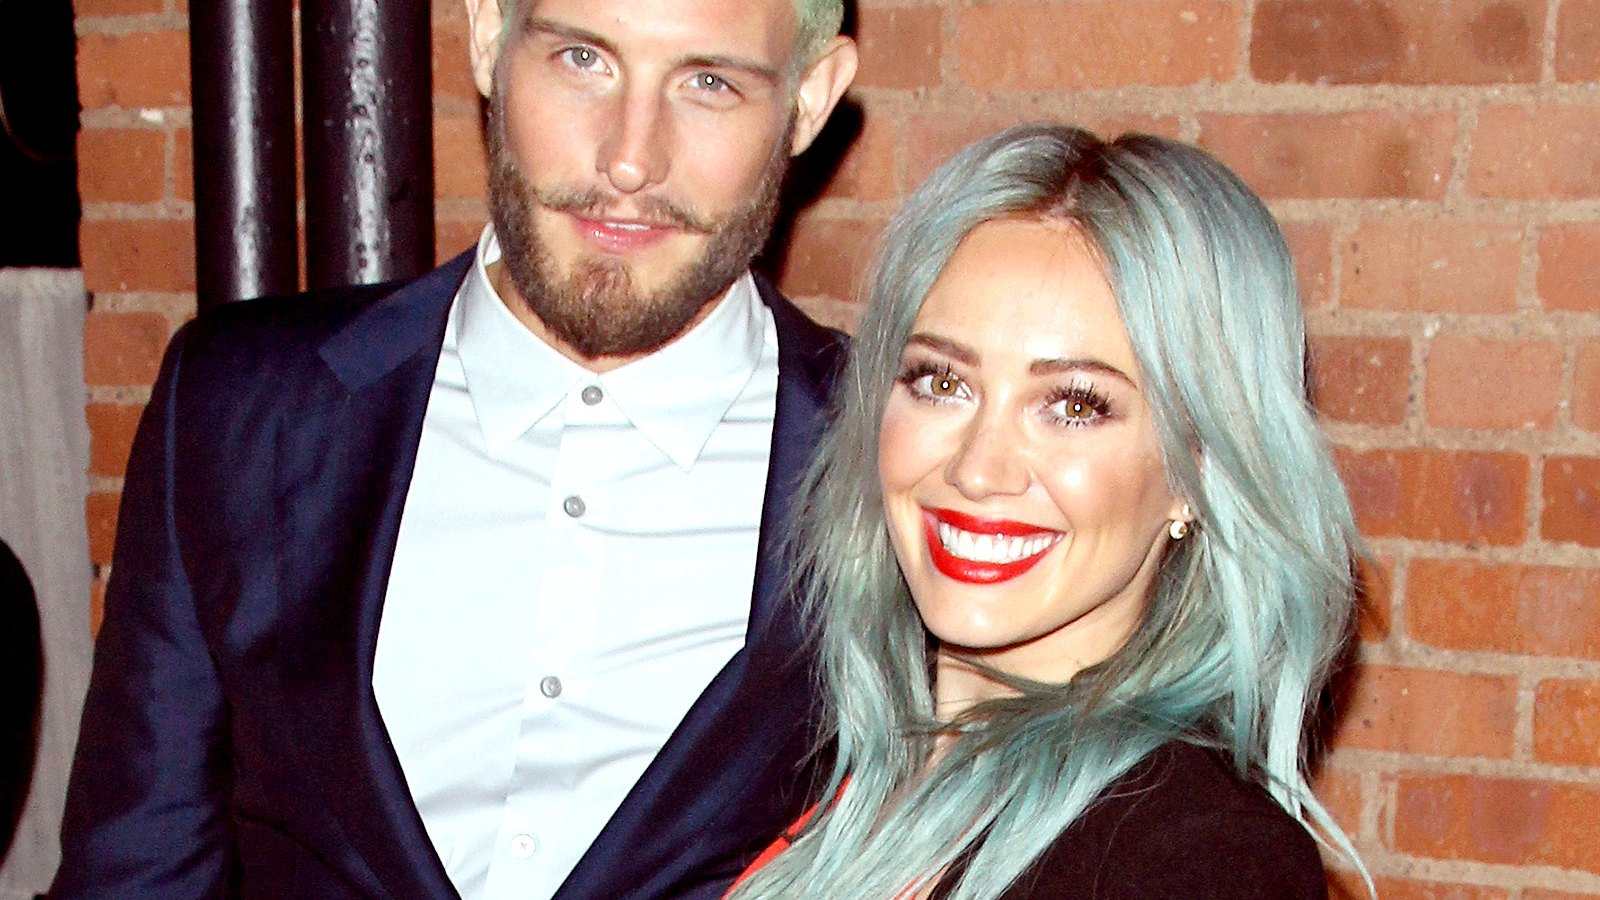 Nico Tortorella and Hilary Duff at TV Land's Younger premiere in NYC.